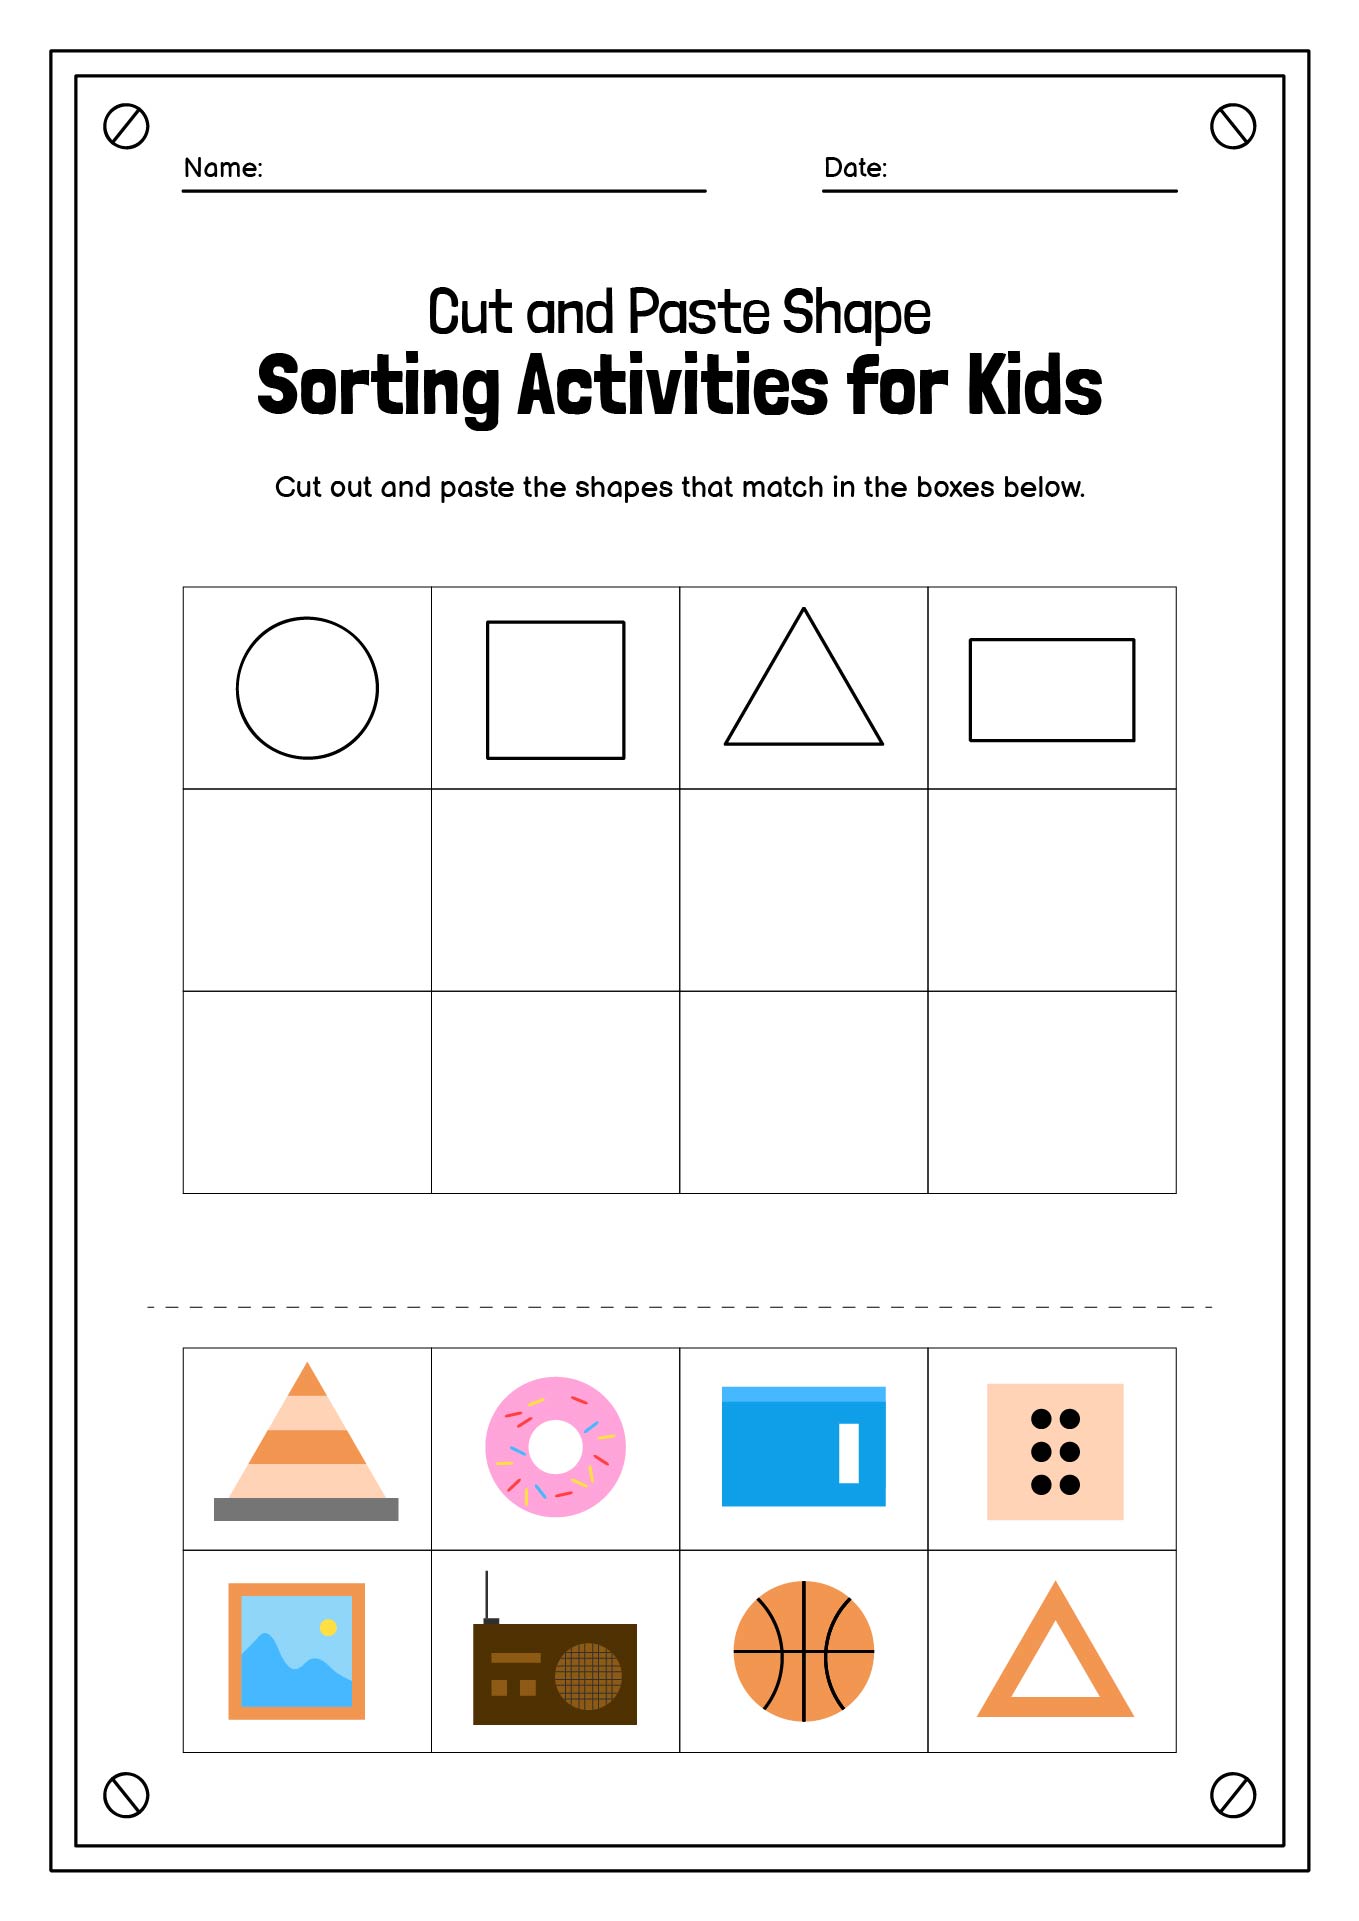 Cut and Paste Shape Sorting Activities for Kids